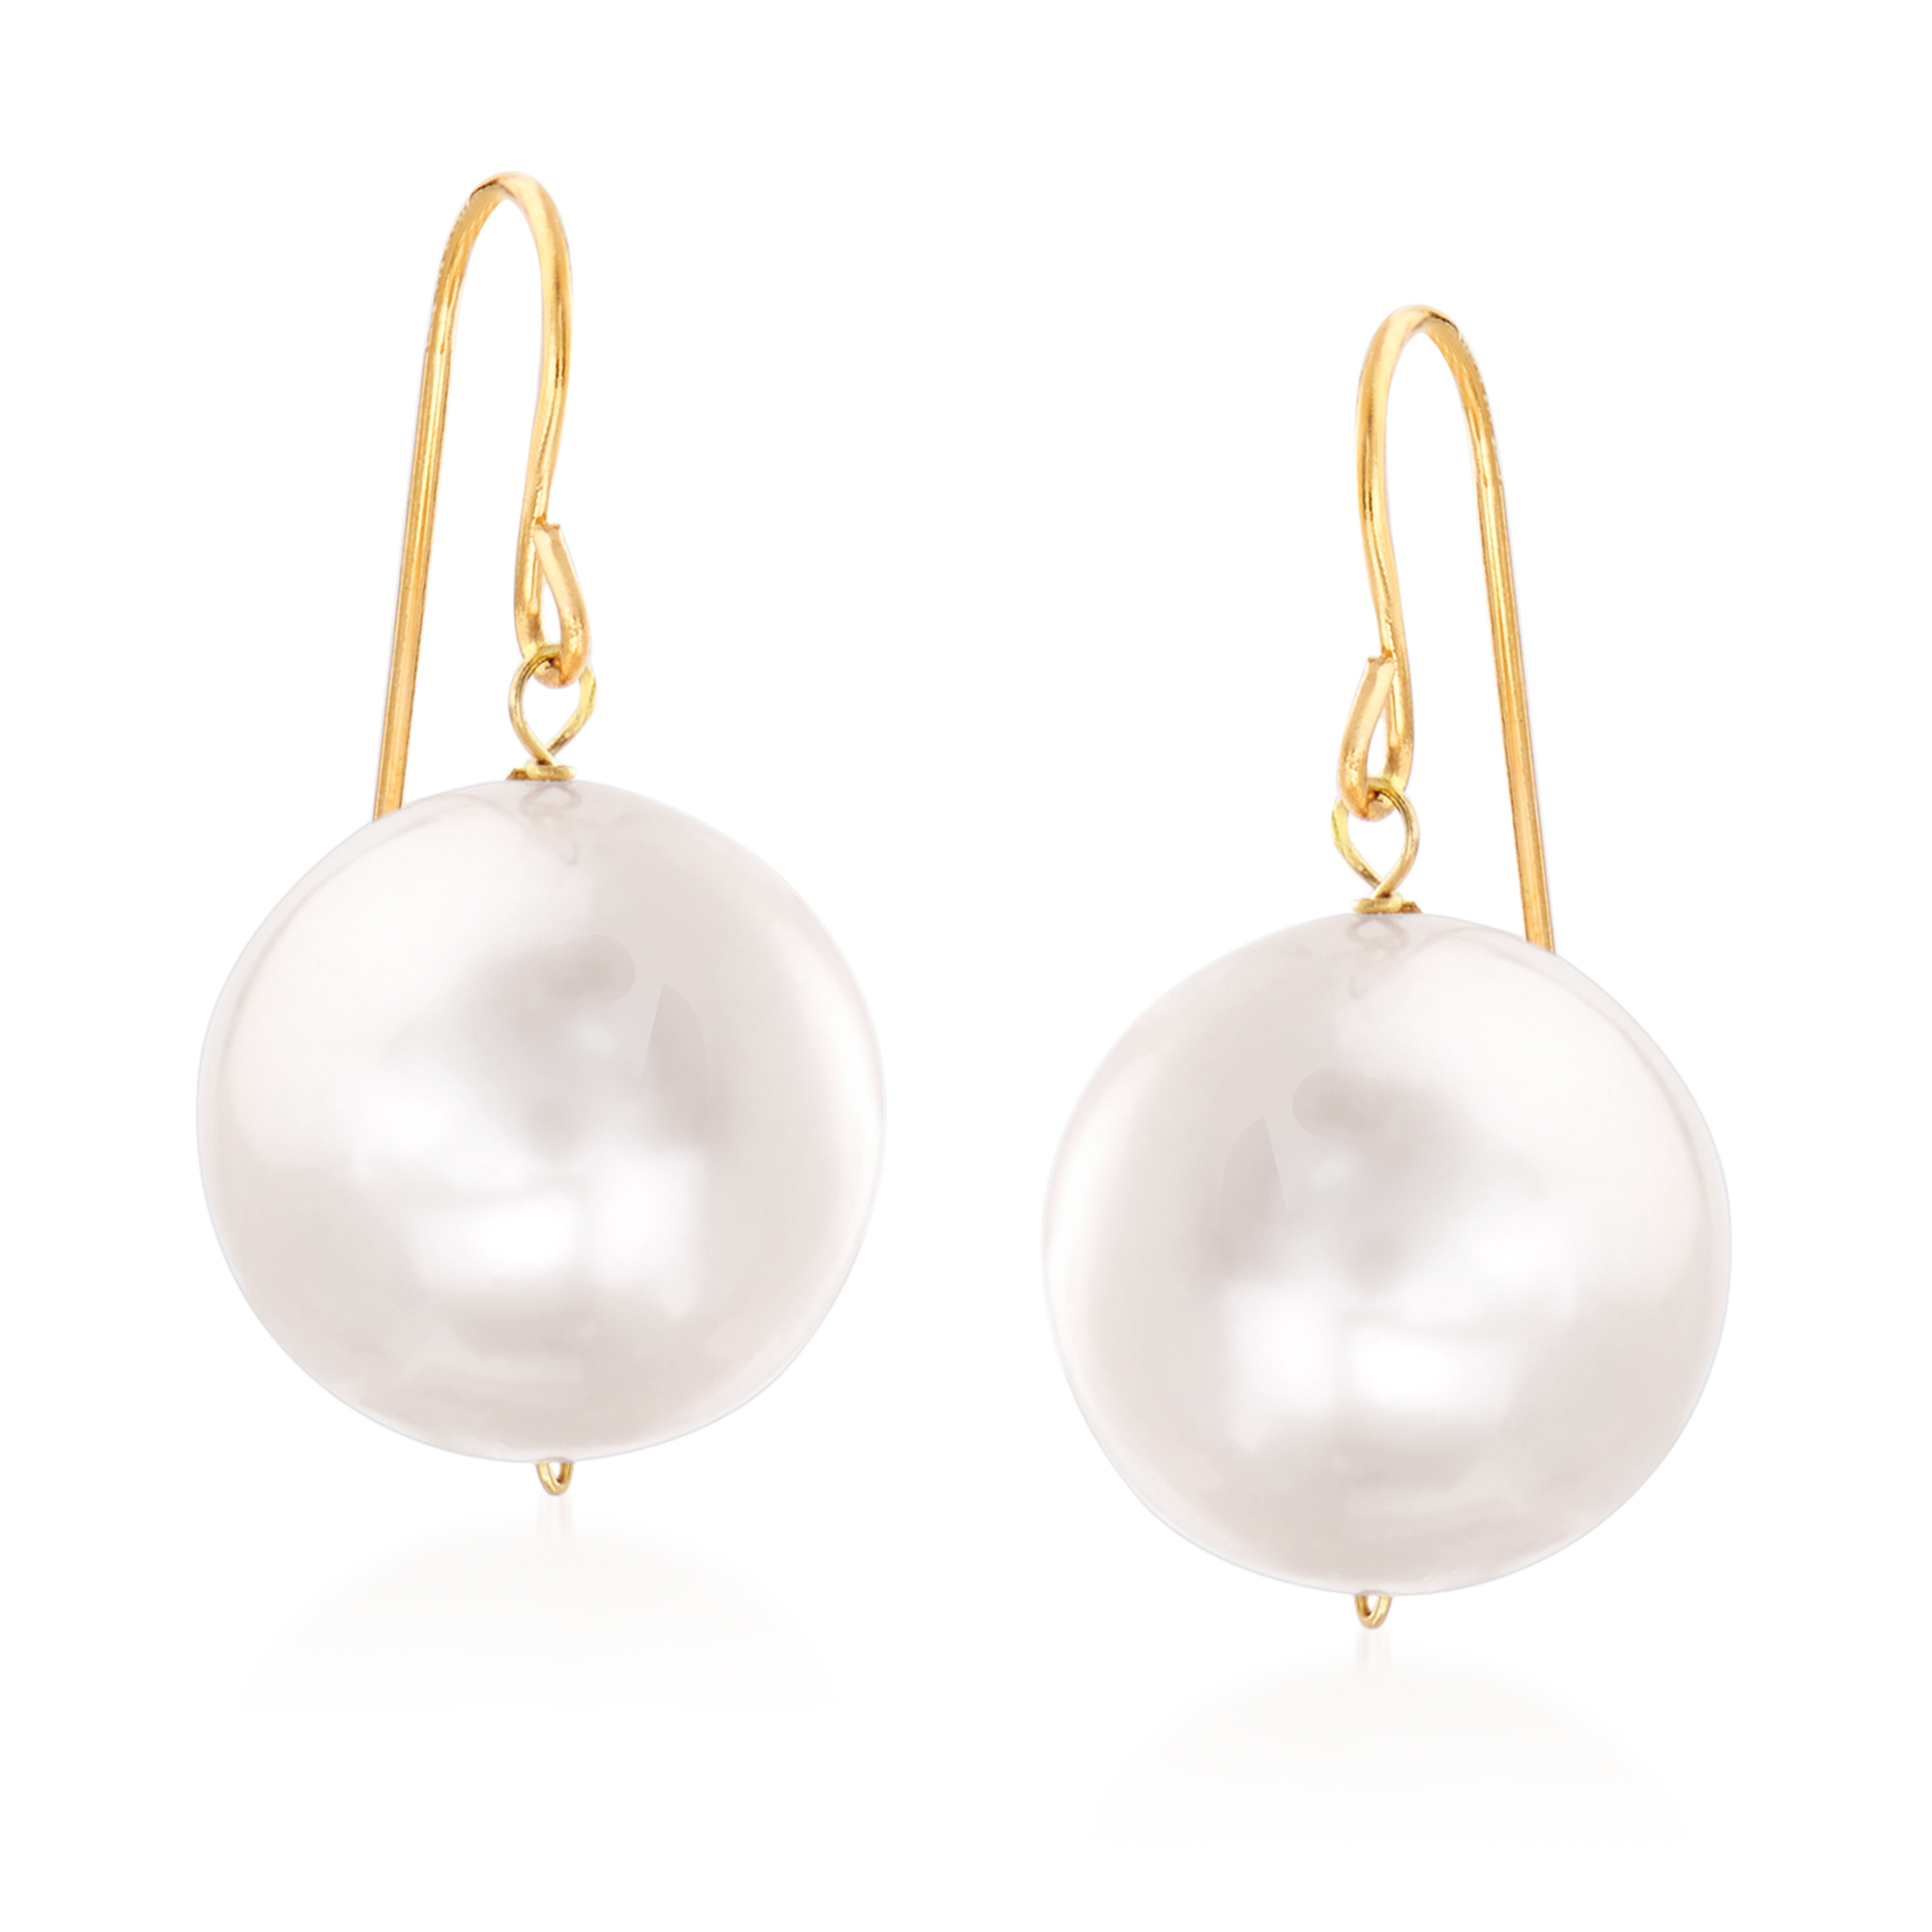 11mm Cultured Pearl Drop Earrings in 14kt Yellow Gold | Ross-Simons